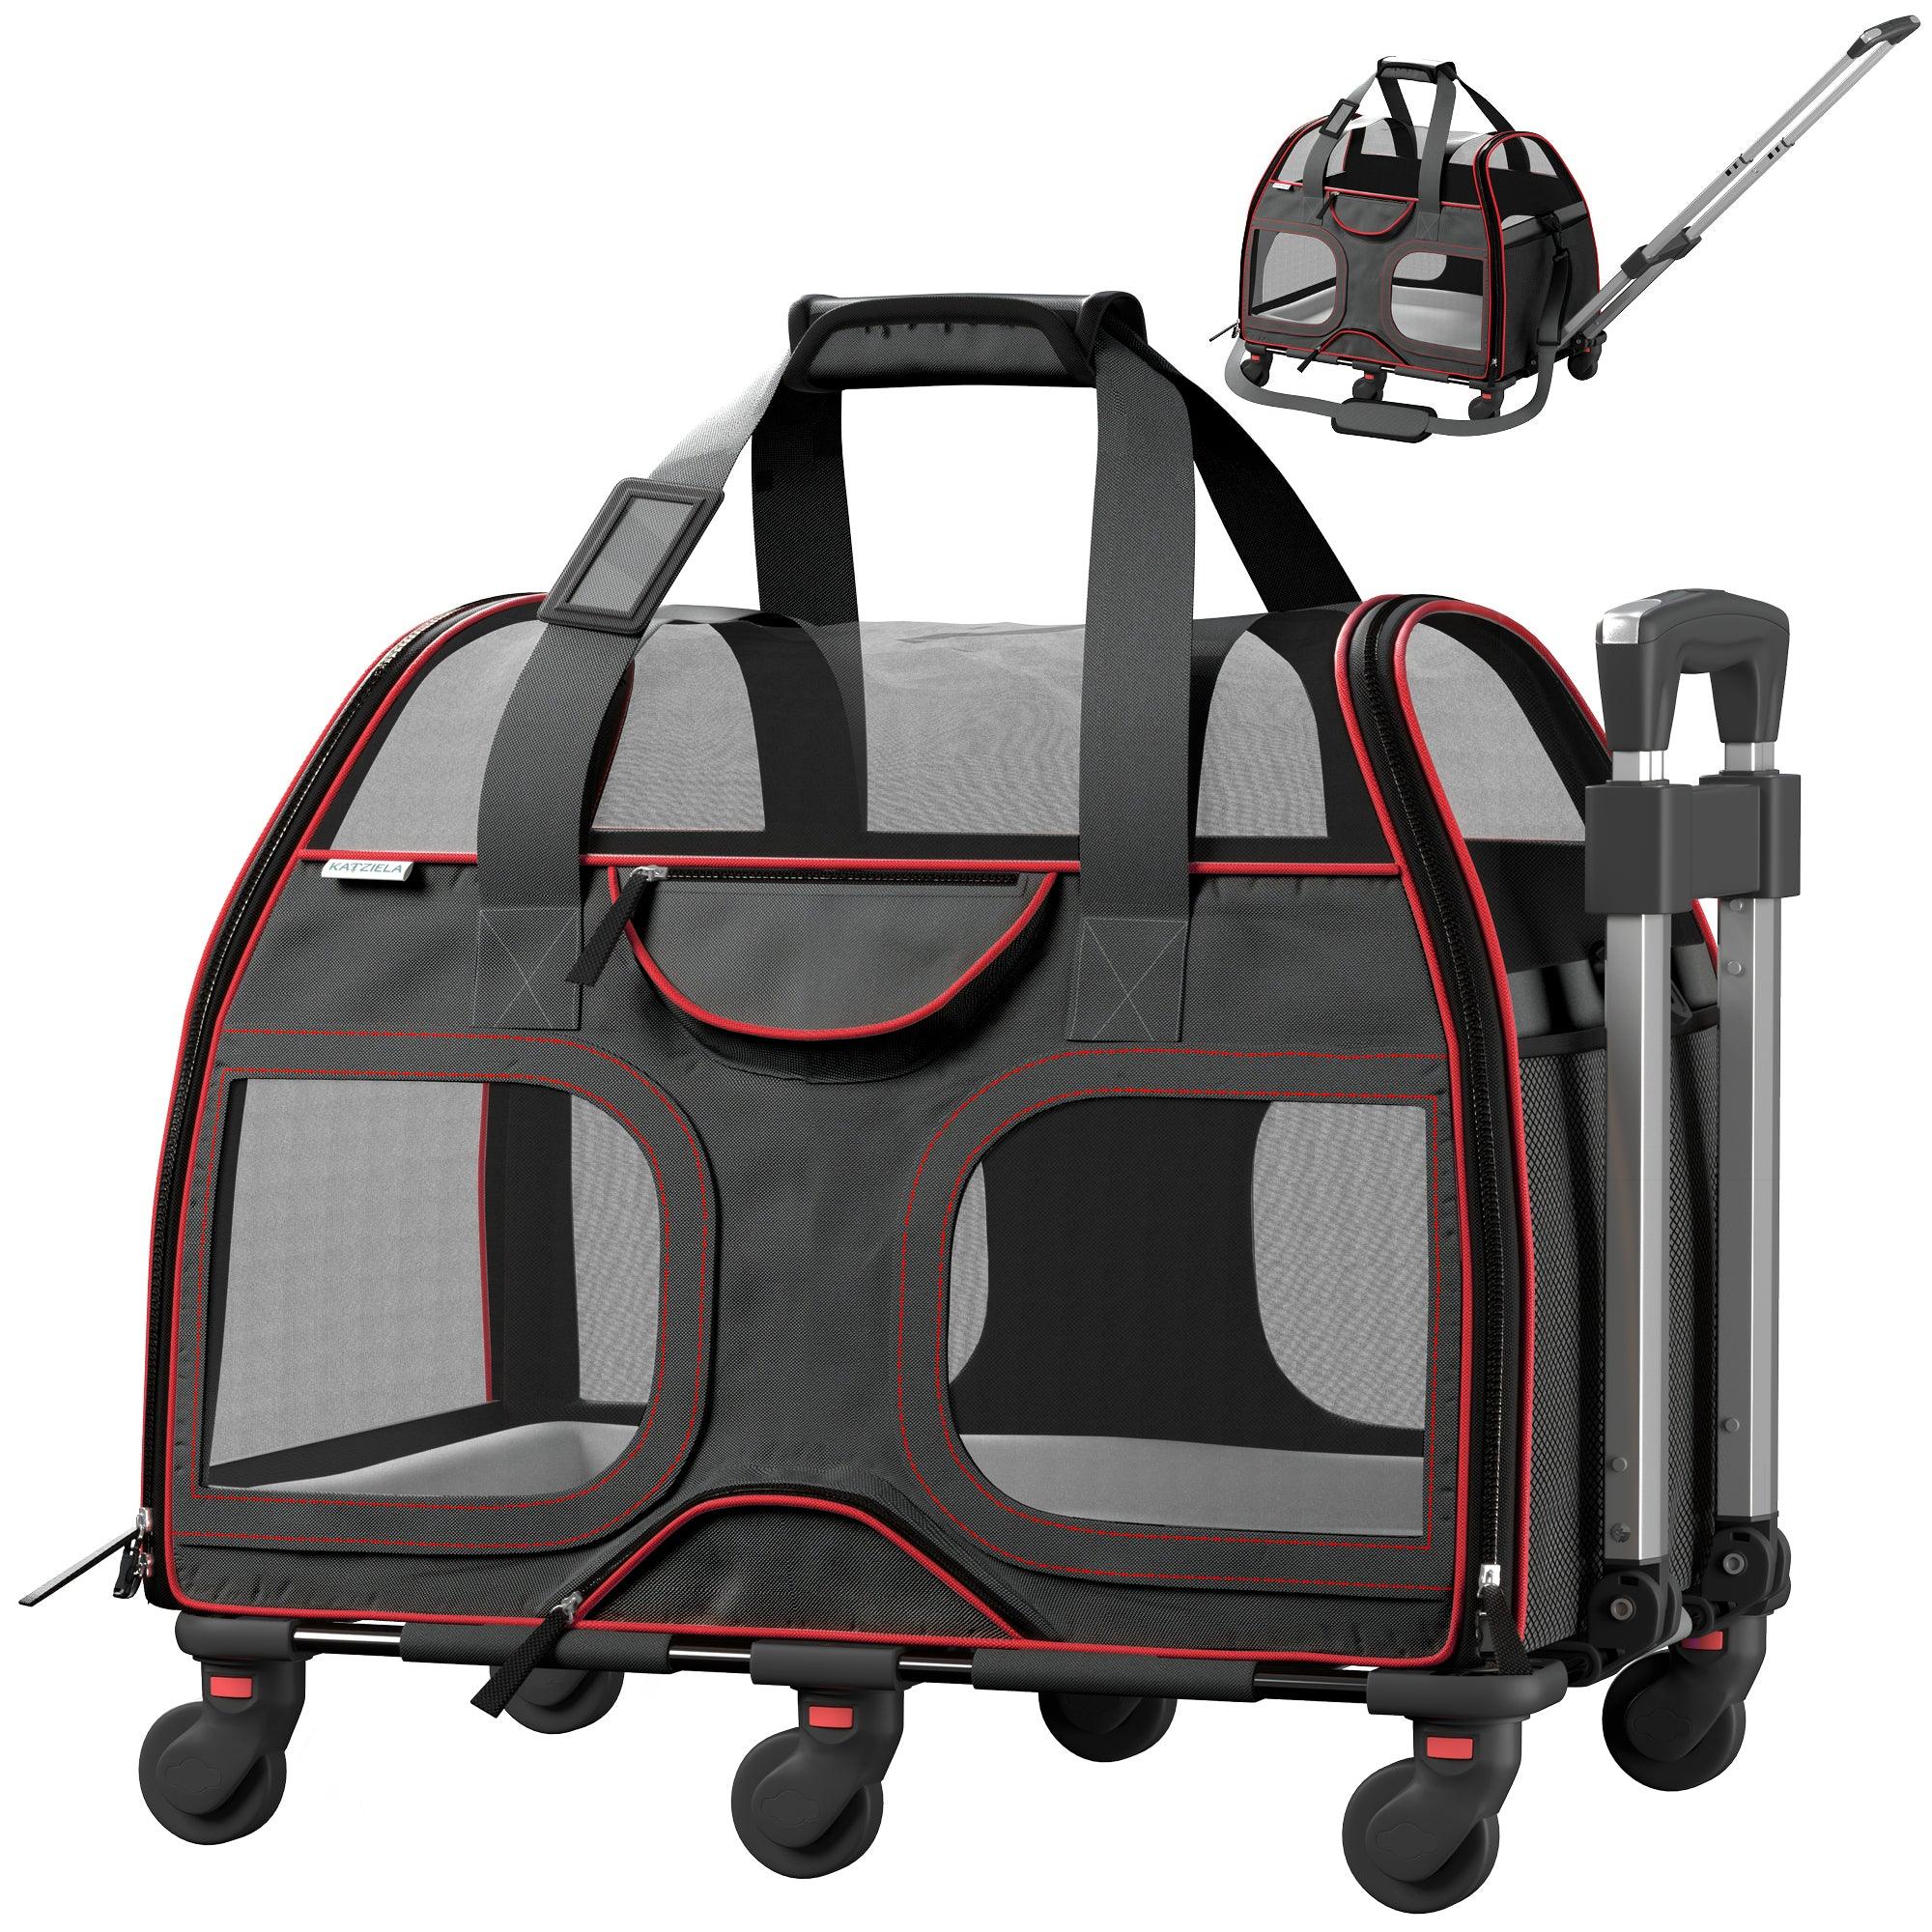 https://cdn.shopify.com/s/files/1/0285/5852/4502/files/luxury-ridertm-pet-carrier-with-removable-wheels-and-telescopic-handle-katziela-1.jpg?v=1690382412&width=2000